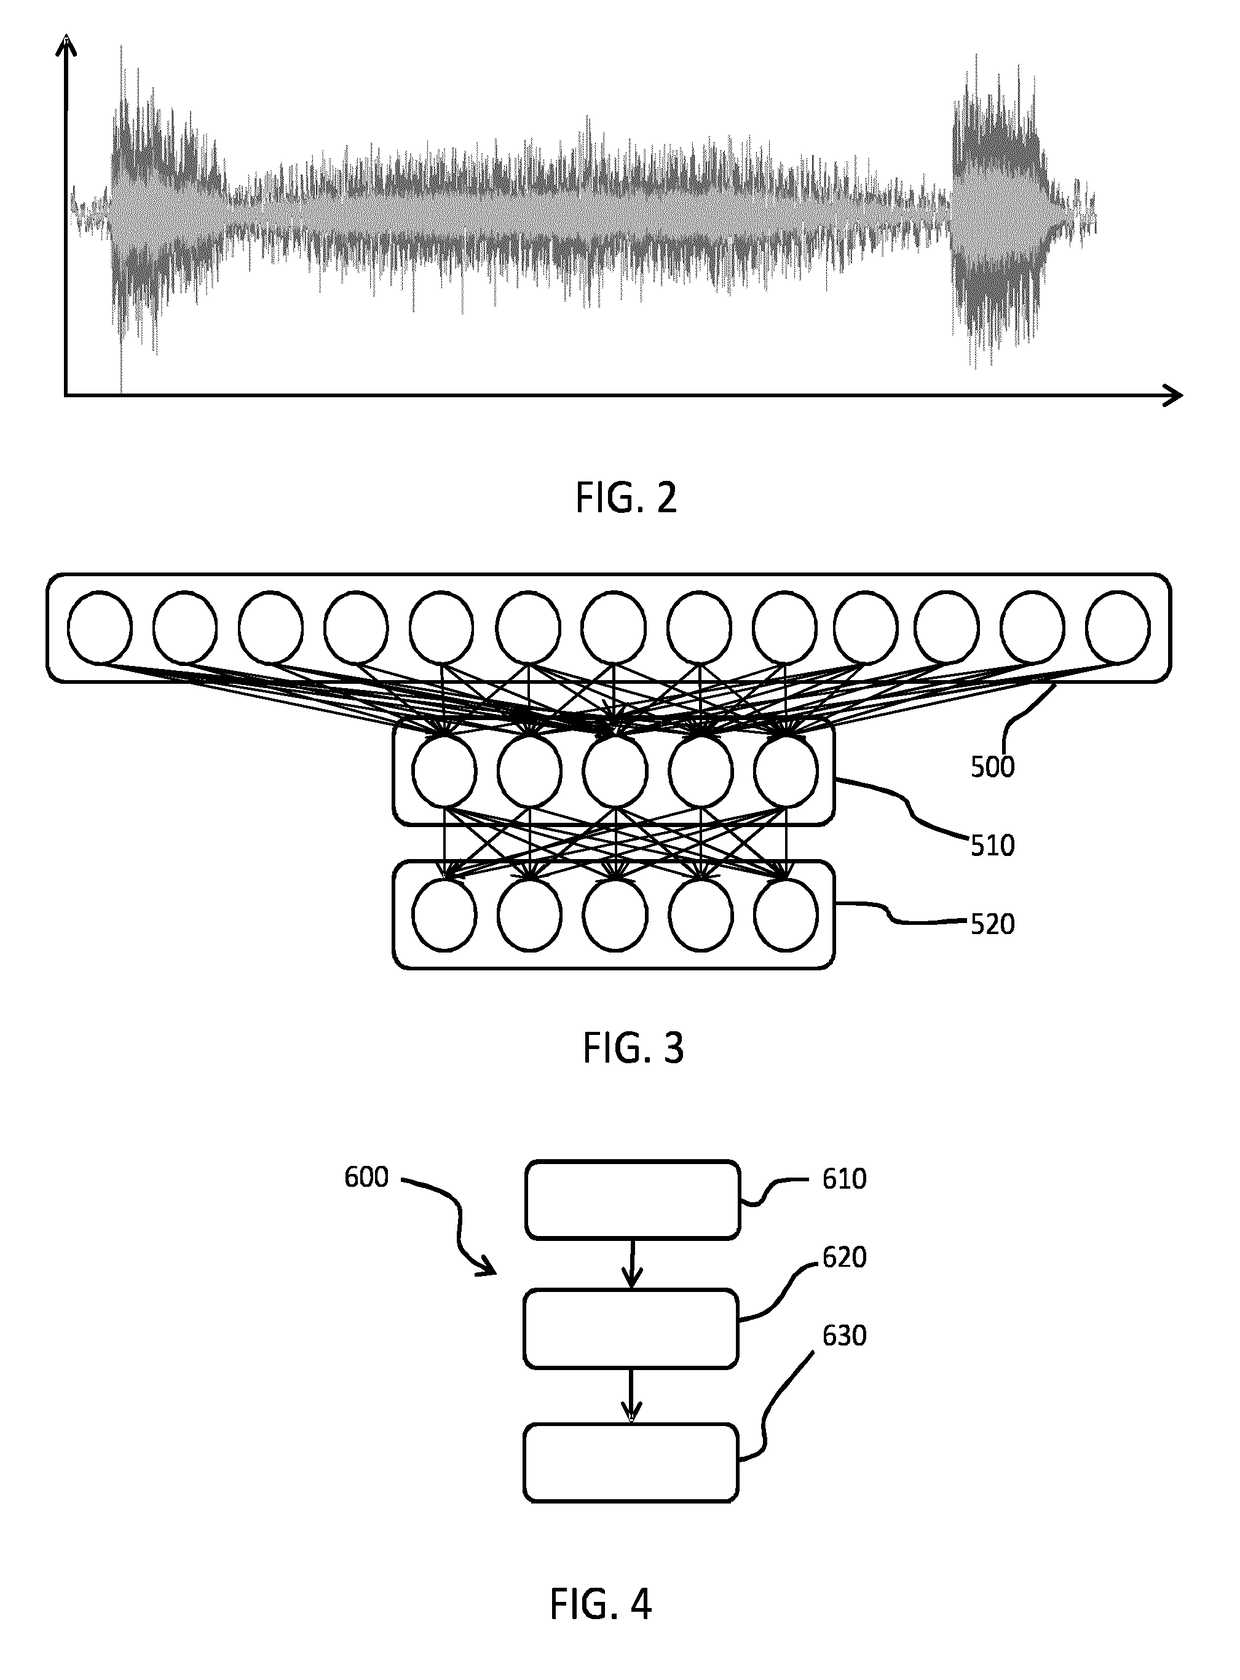 Monitoring device for subject behavior monitoring